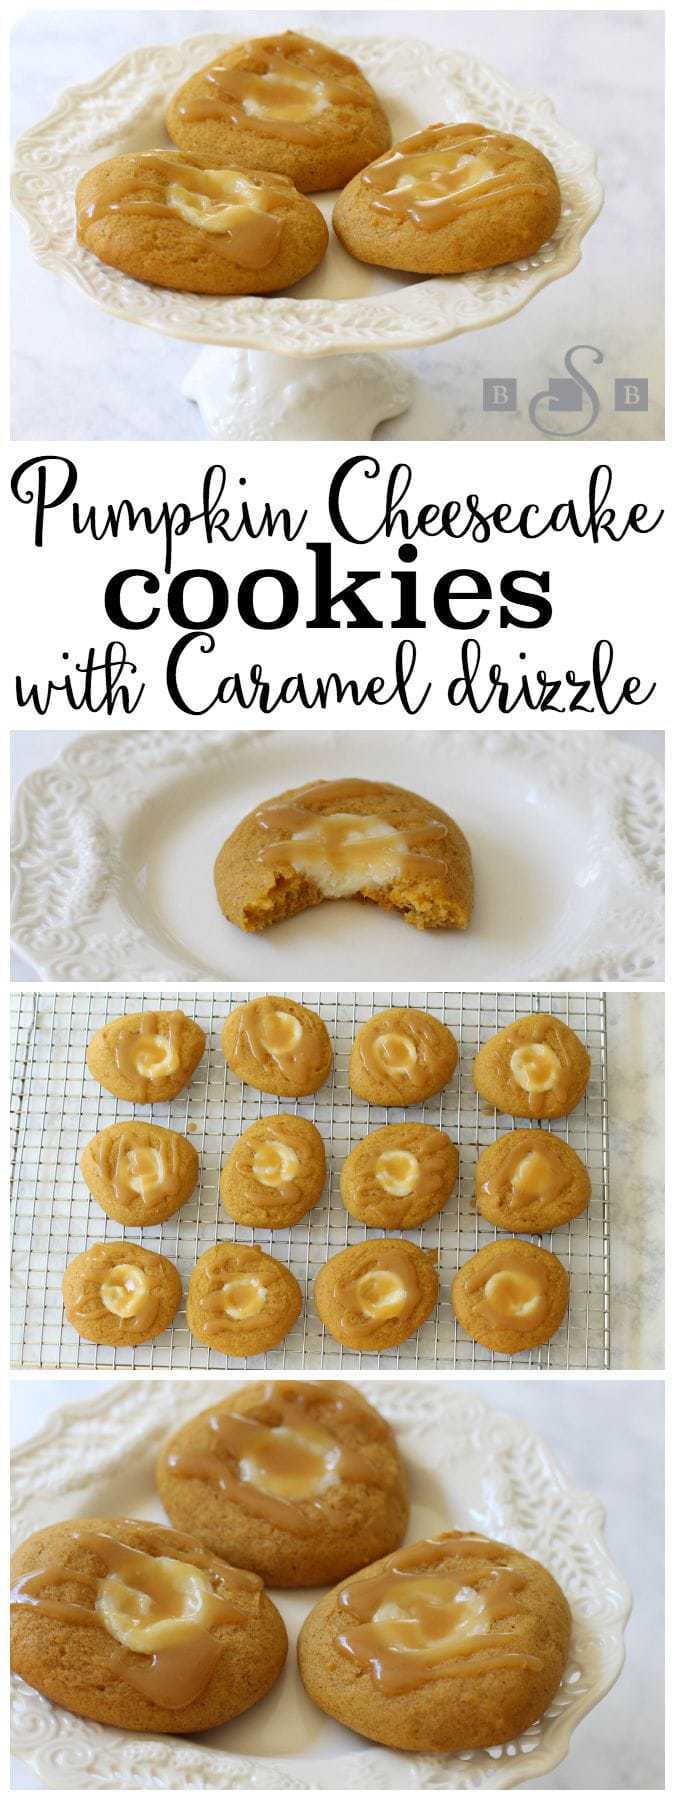 Pumpkin Cheesecake Cookies with Caramel are a lovely combination of pumpkin flavor, creamy cheesecake filling and a smooth caramel drizzle. These pumpkin cheesecake cookies are soft, pillowy and loaded with amazing flavor.